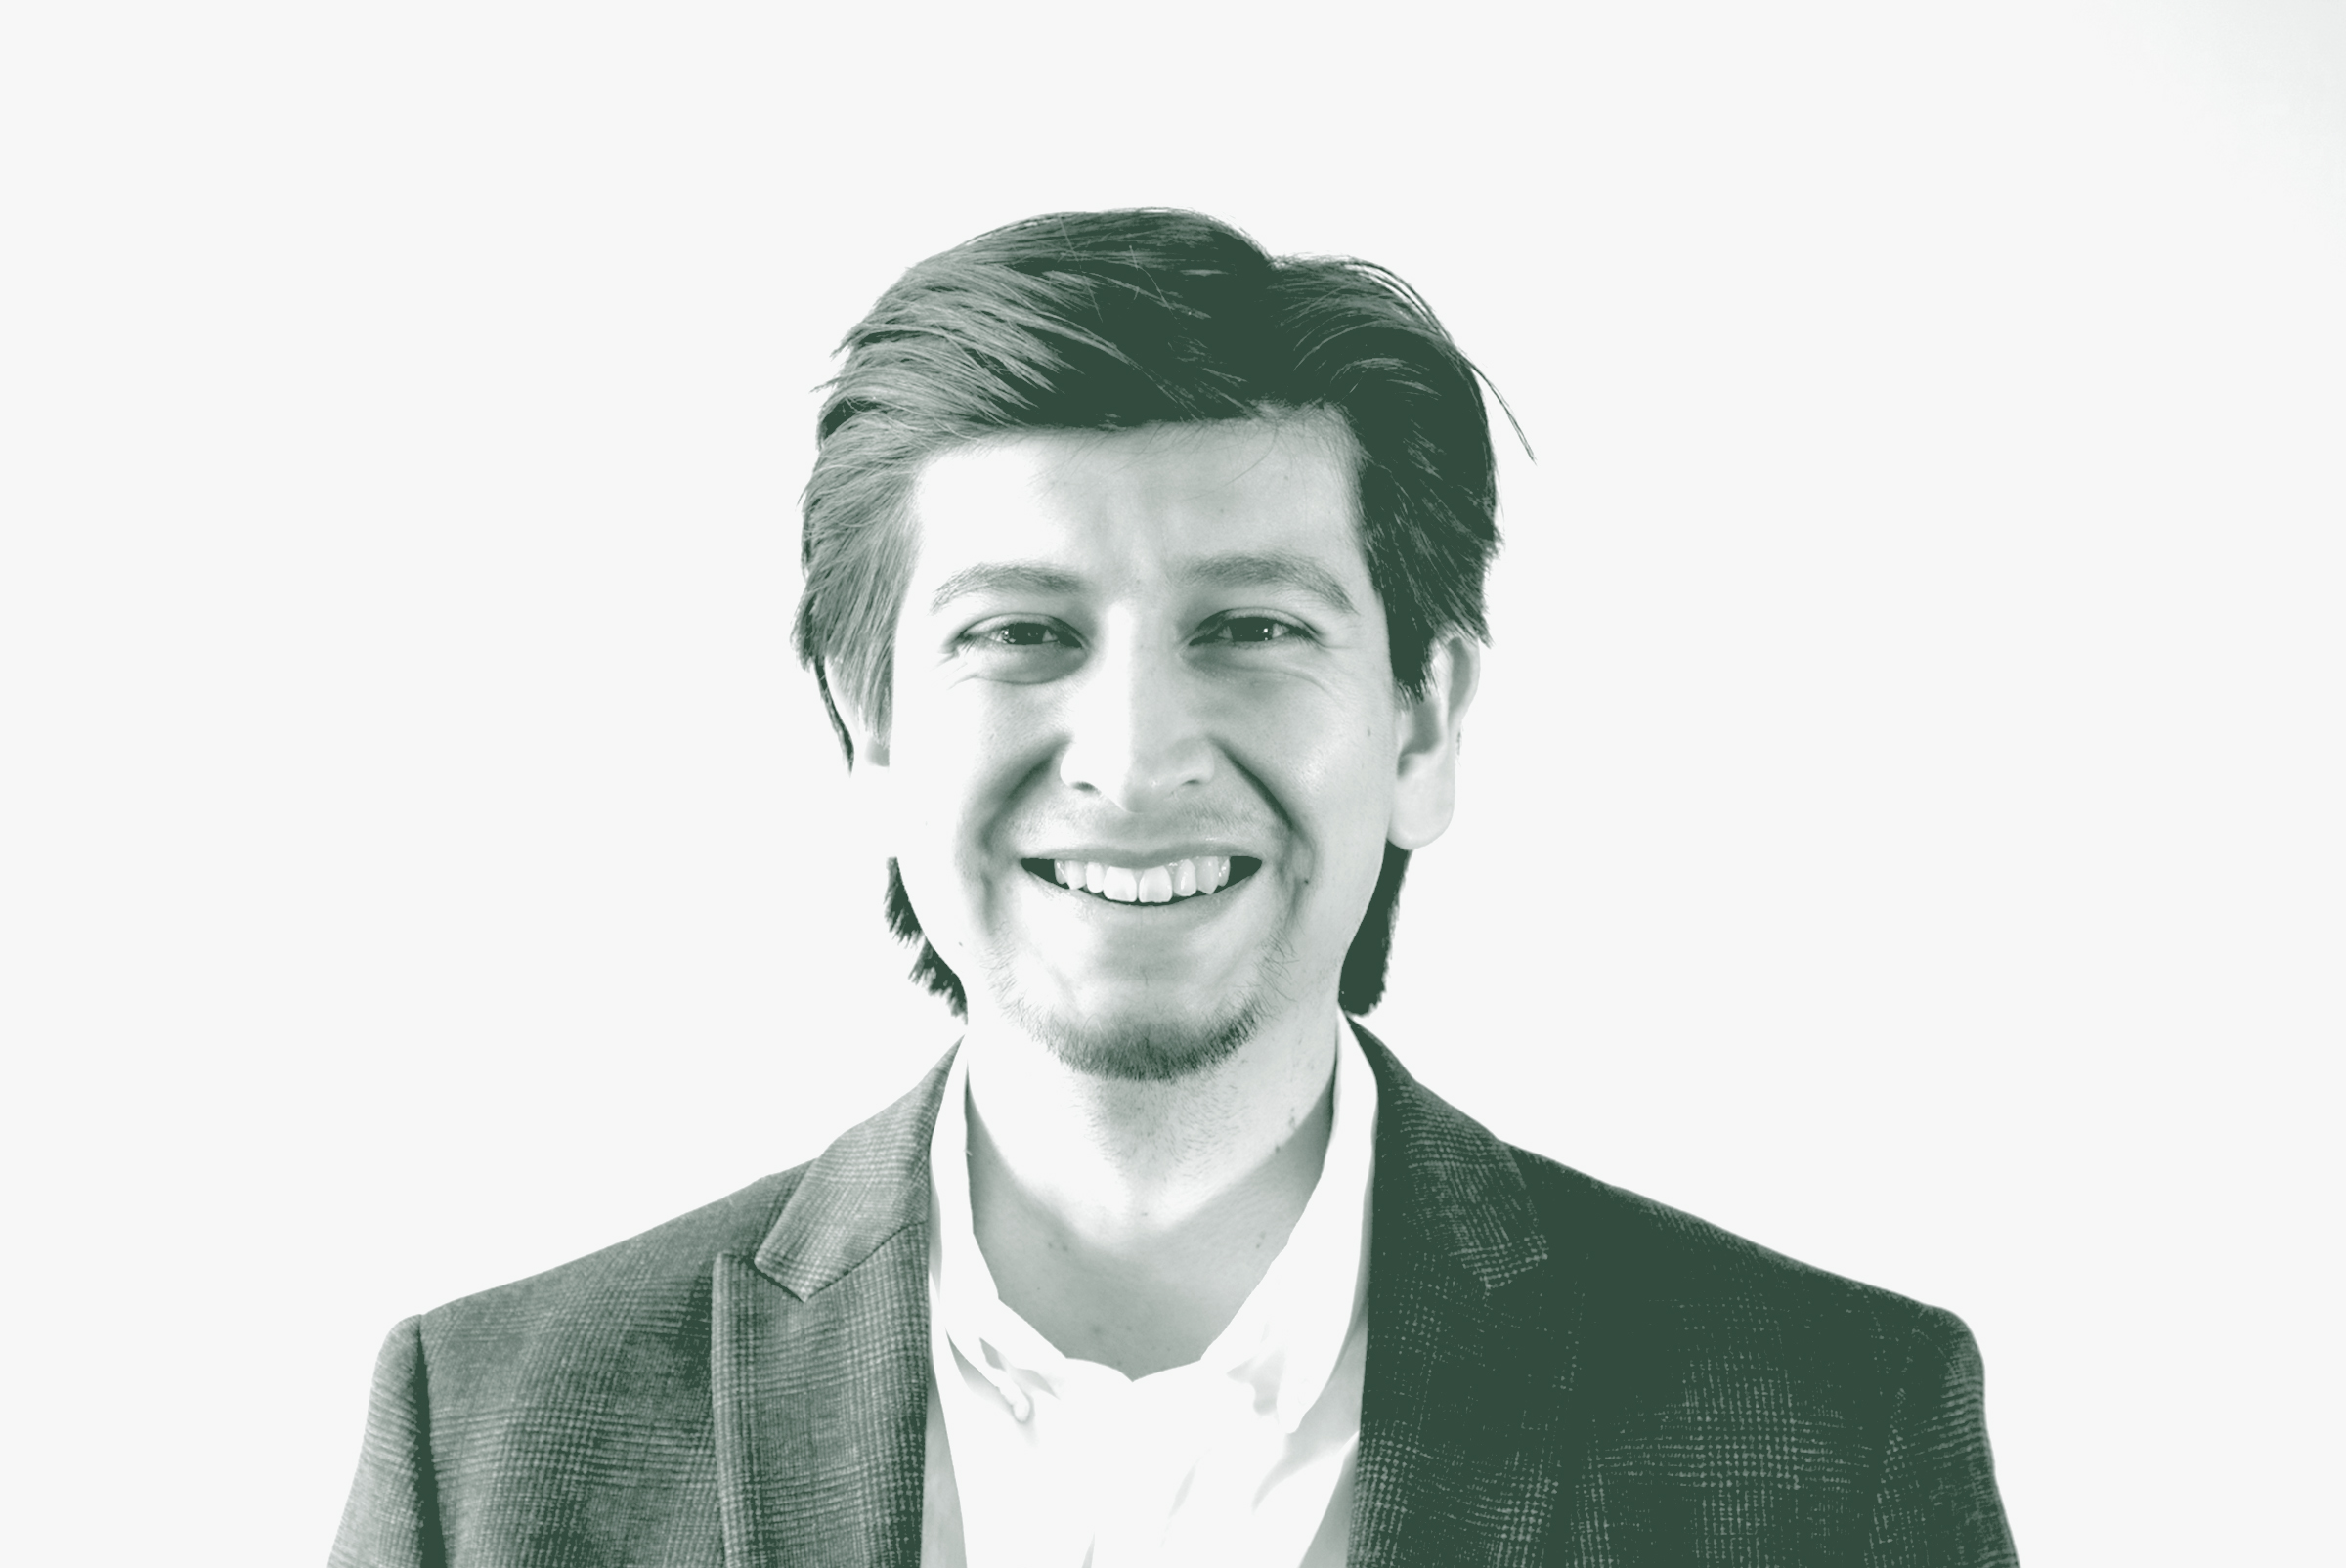 A black and white portrait of Roberto Oviedo, a Senior Project Coordinator with GFF in the Corporate / Office Studio, in front of a white background.